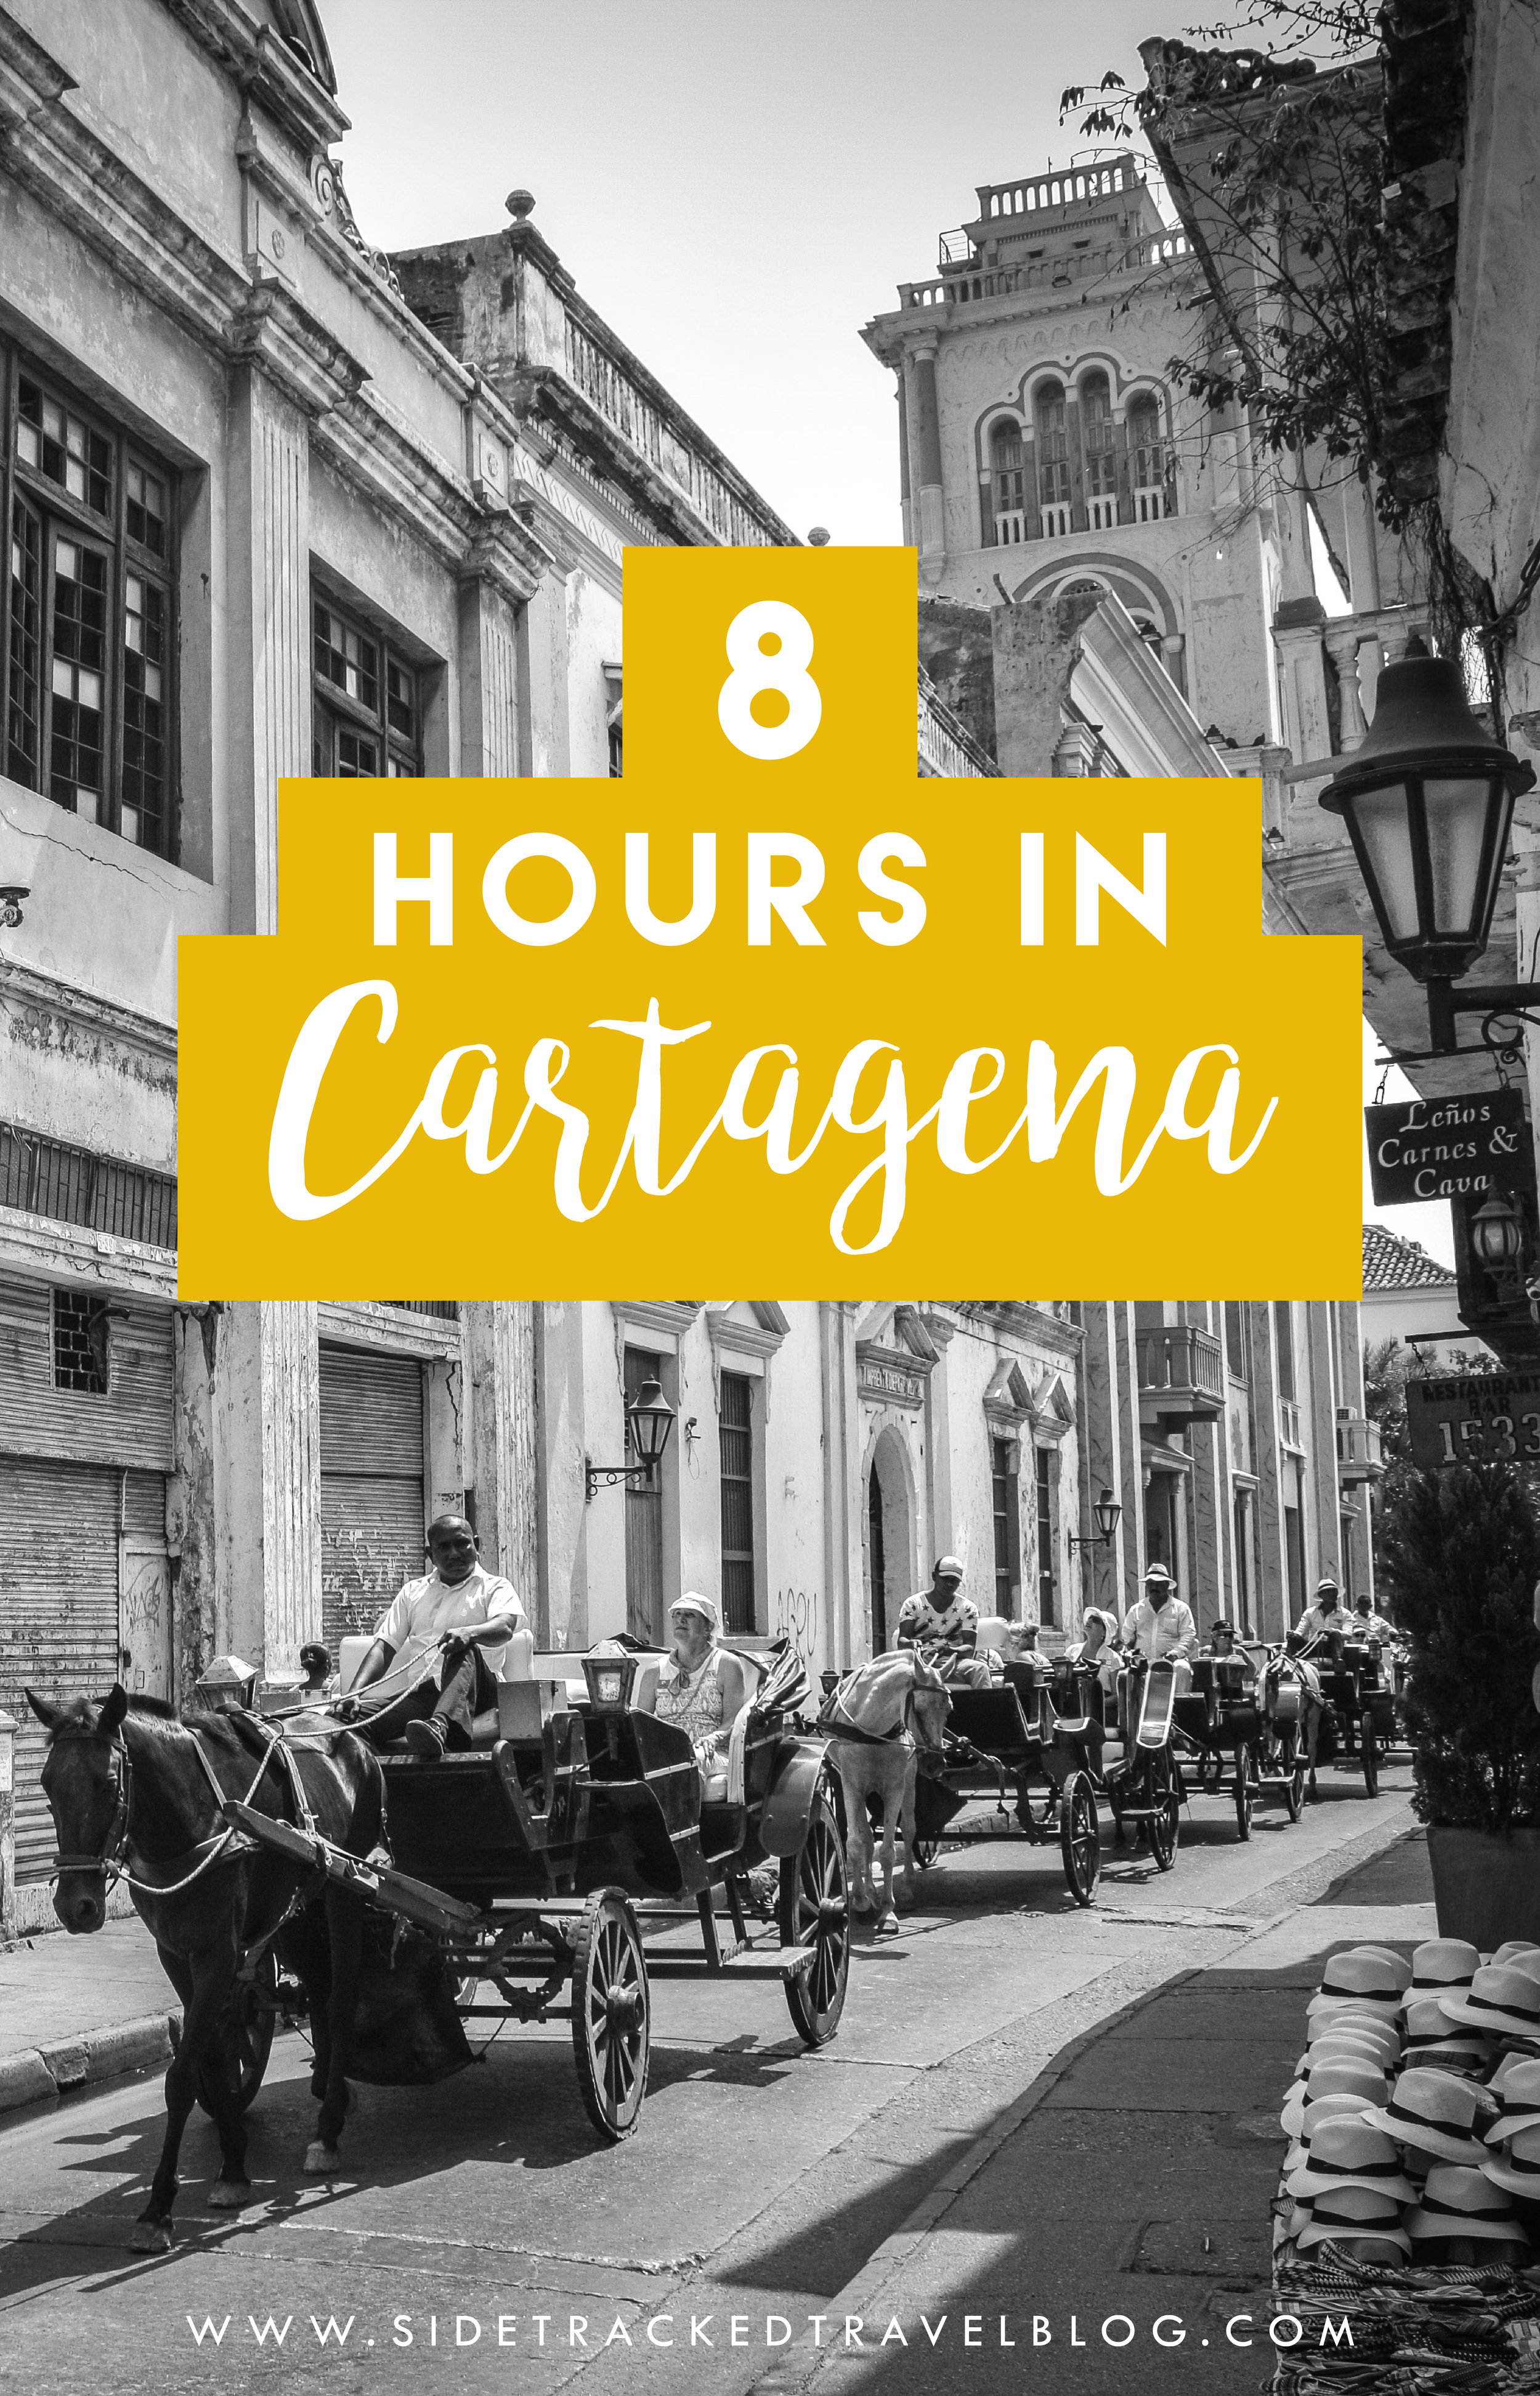 Planning to visit one of South America’s most beautiful cities but strapped for time? Then you should read this post full of things you can see and do in eight hours in Cartagena!